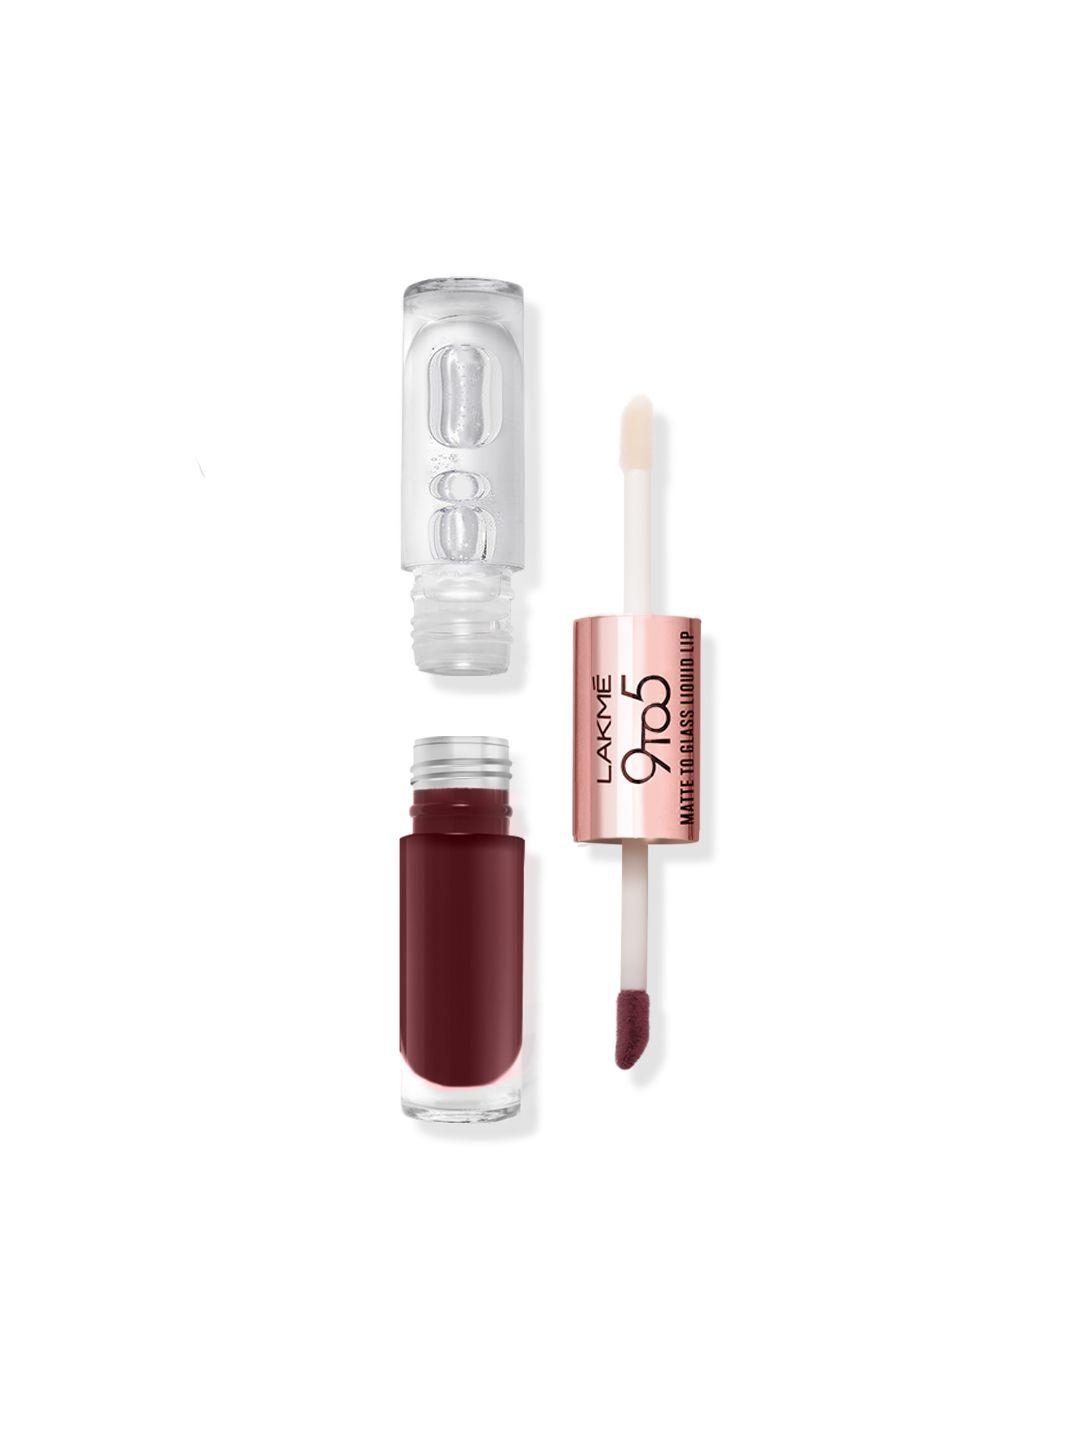 lakme 9to5 matte to glass transfer-proof liquid lip color 7.6ml - bold in red